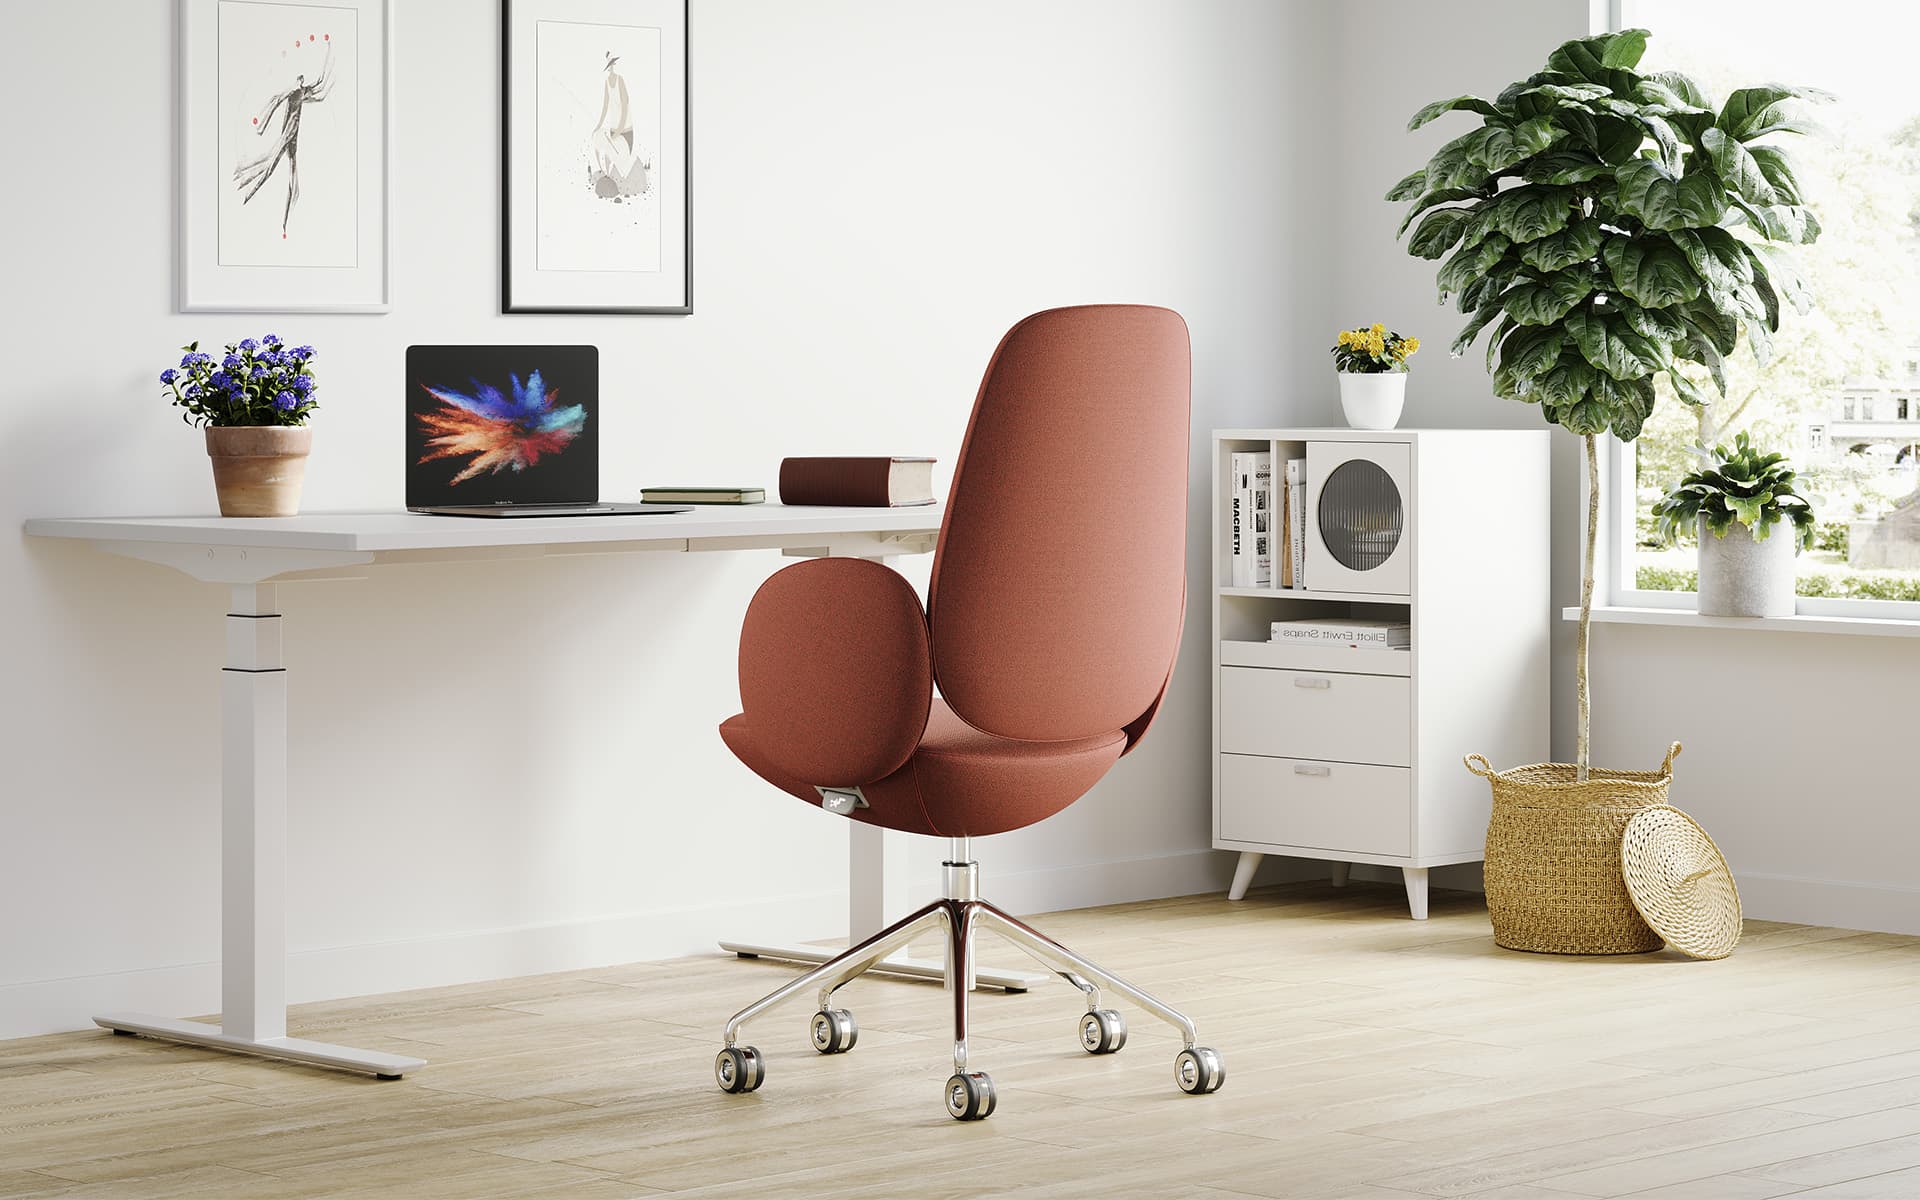 Red Henglin Tony swifel chair by ITO Design at a modern home workplace